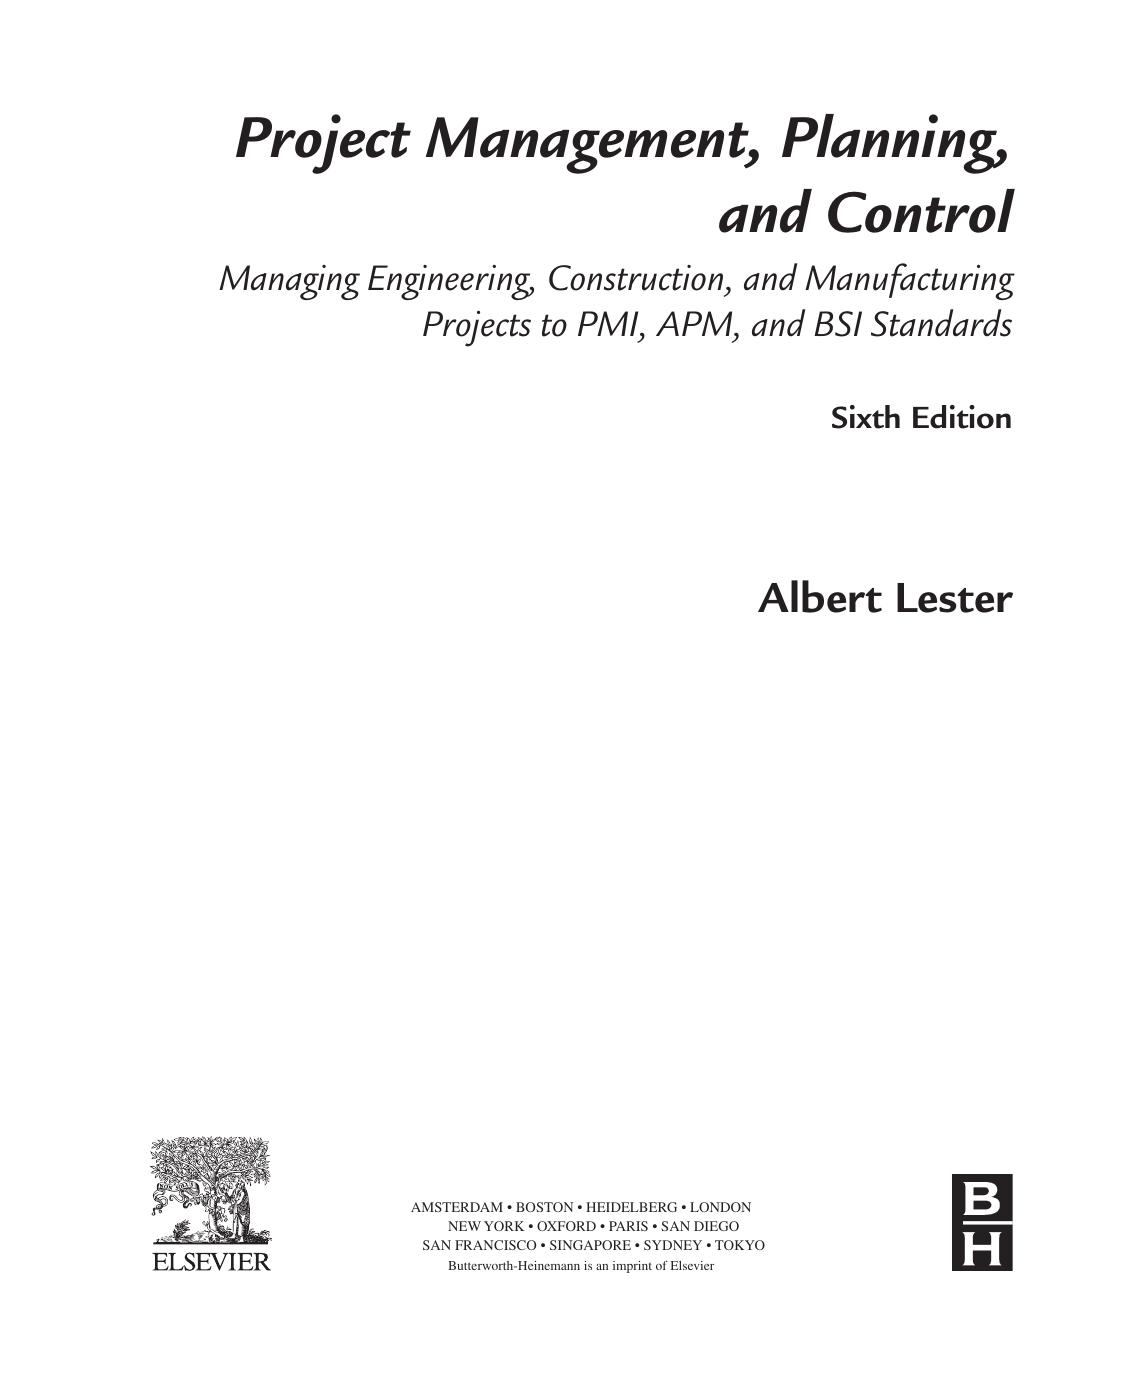 Project Management, Planning and Control, 6th ed 2014